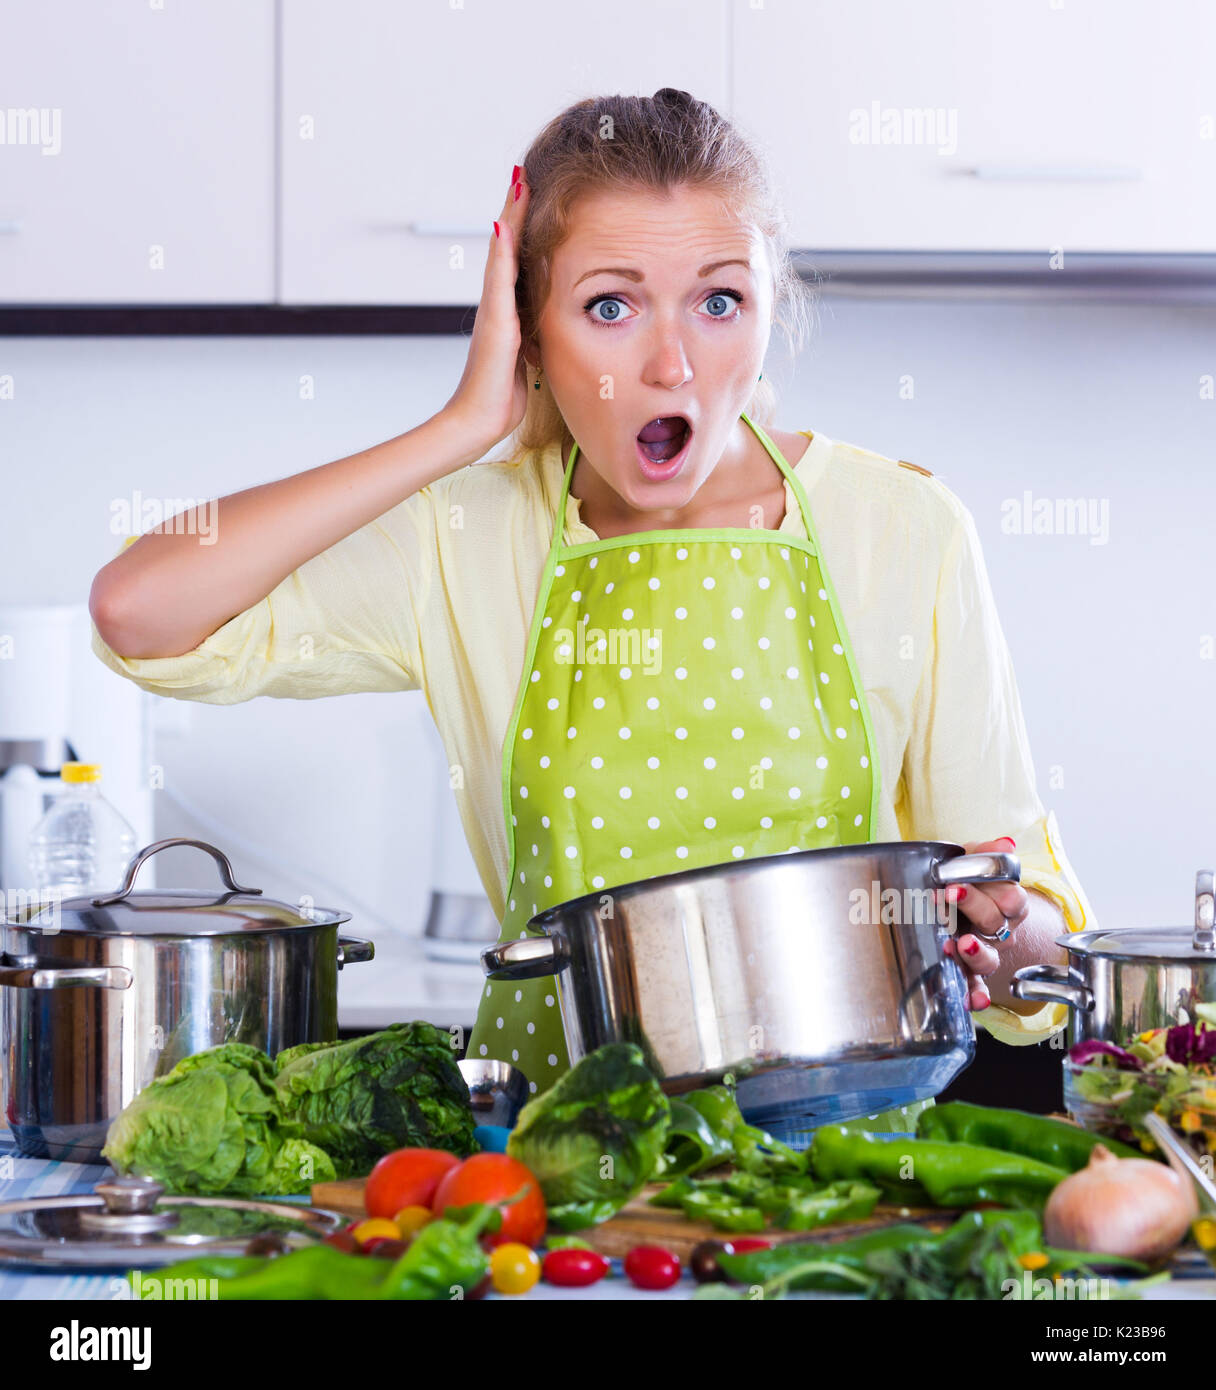 Funny Cooking Stress Stock Photos - 694 Images